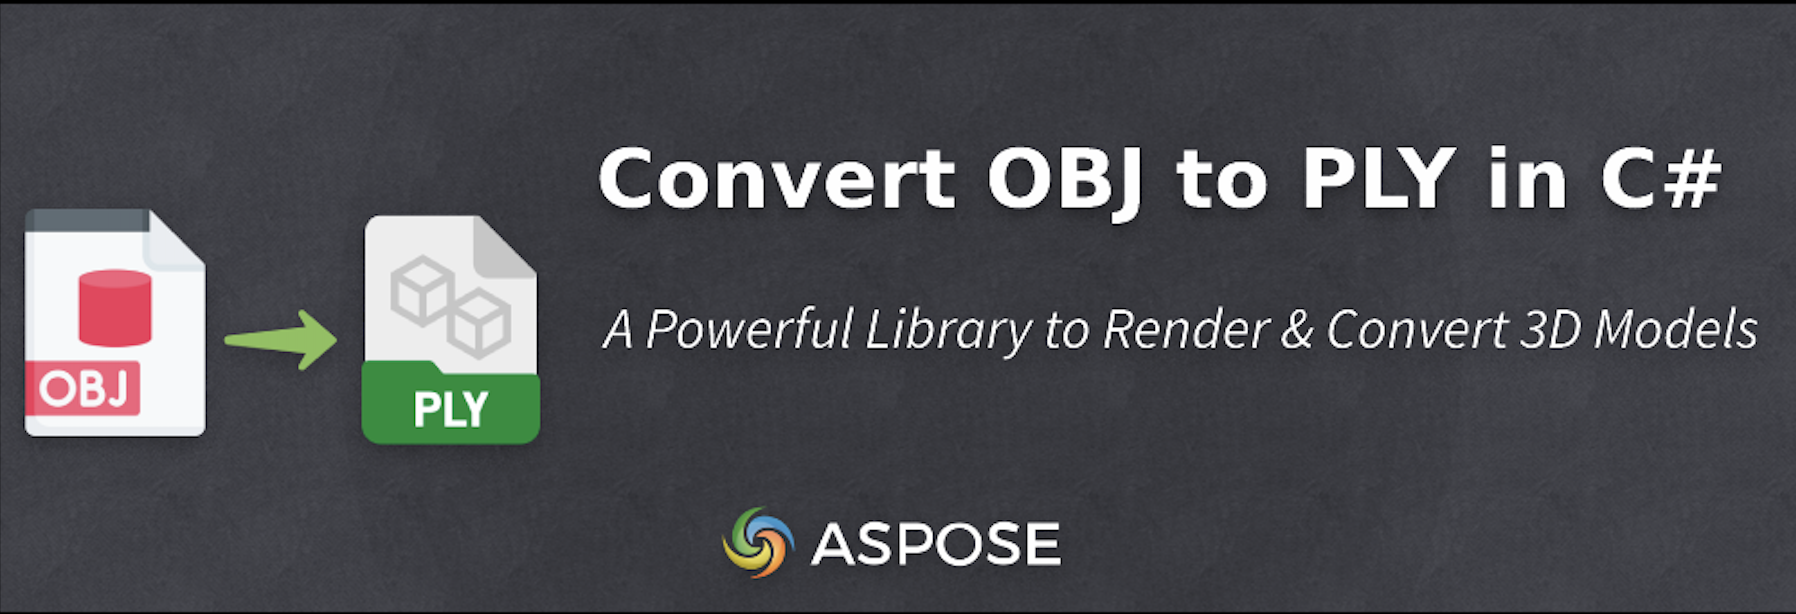 Convert OBJ to PLY in C#